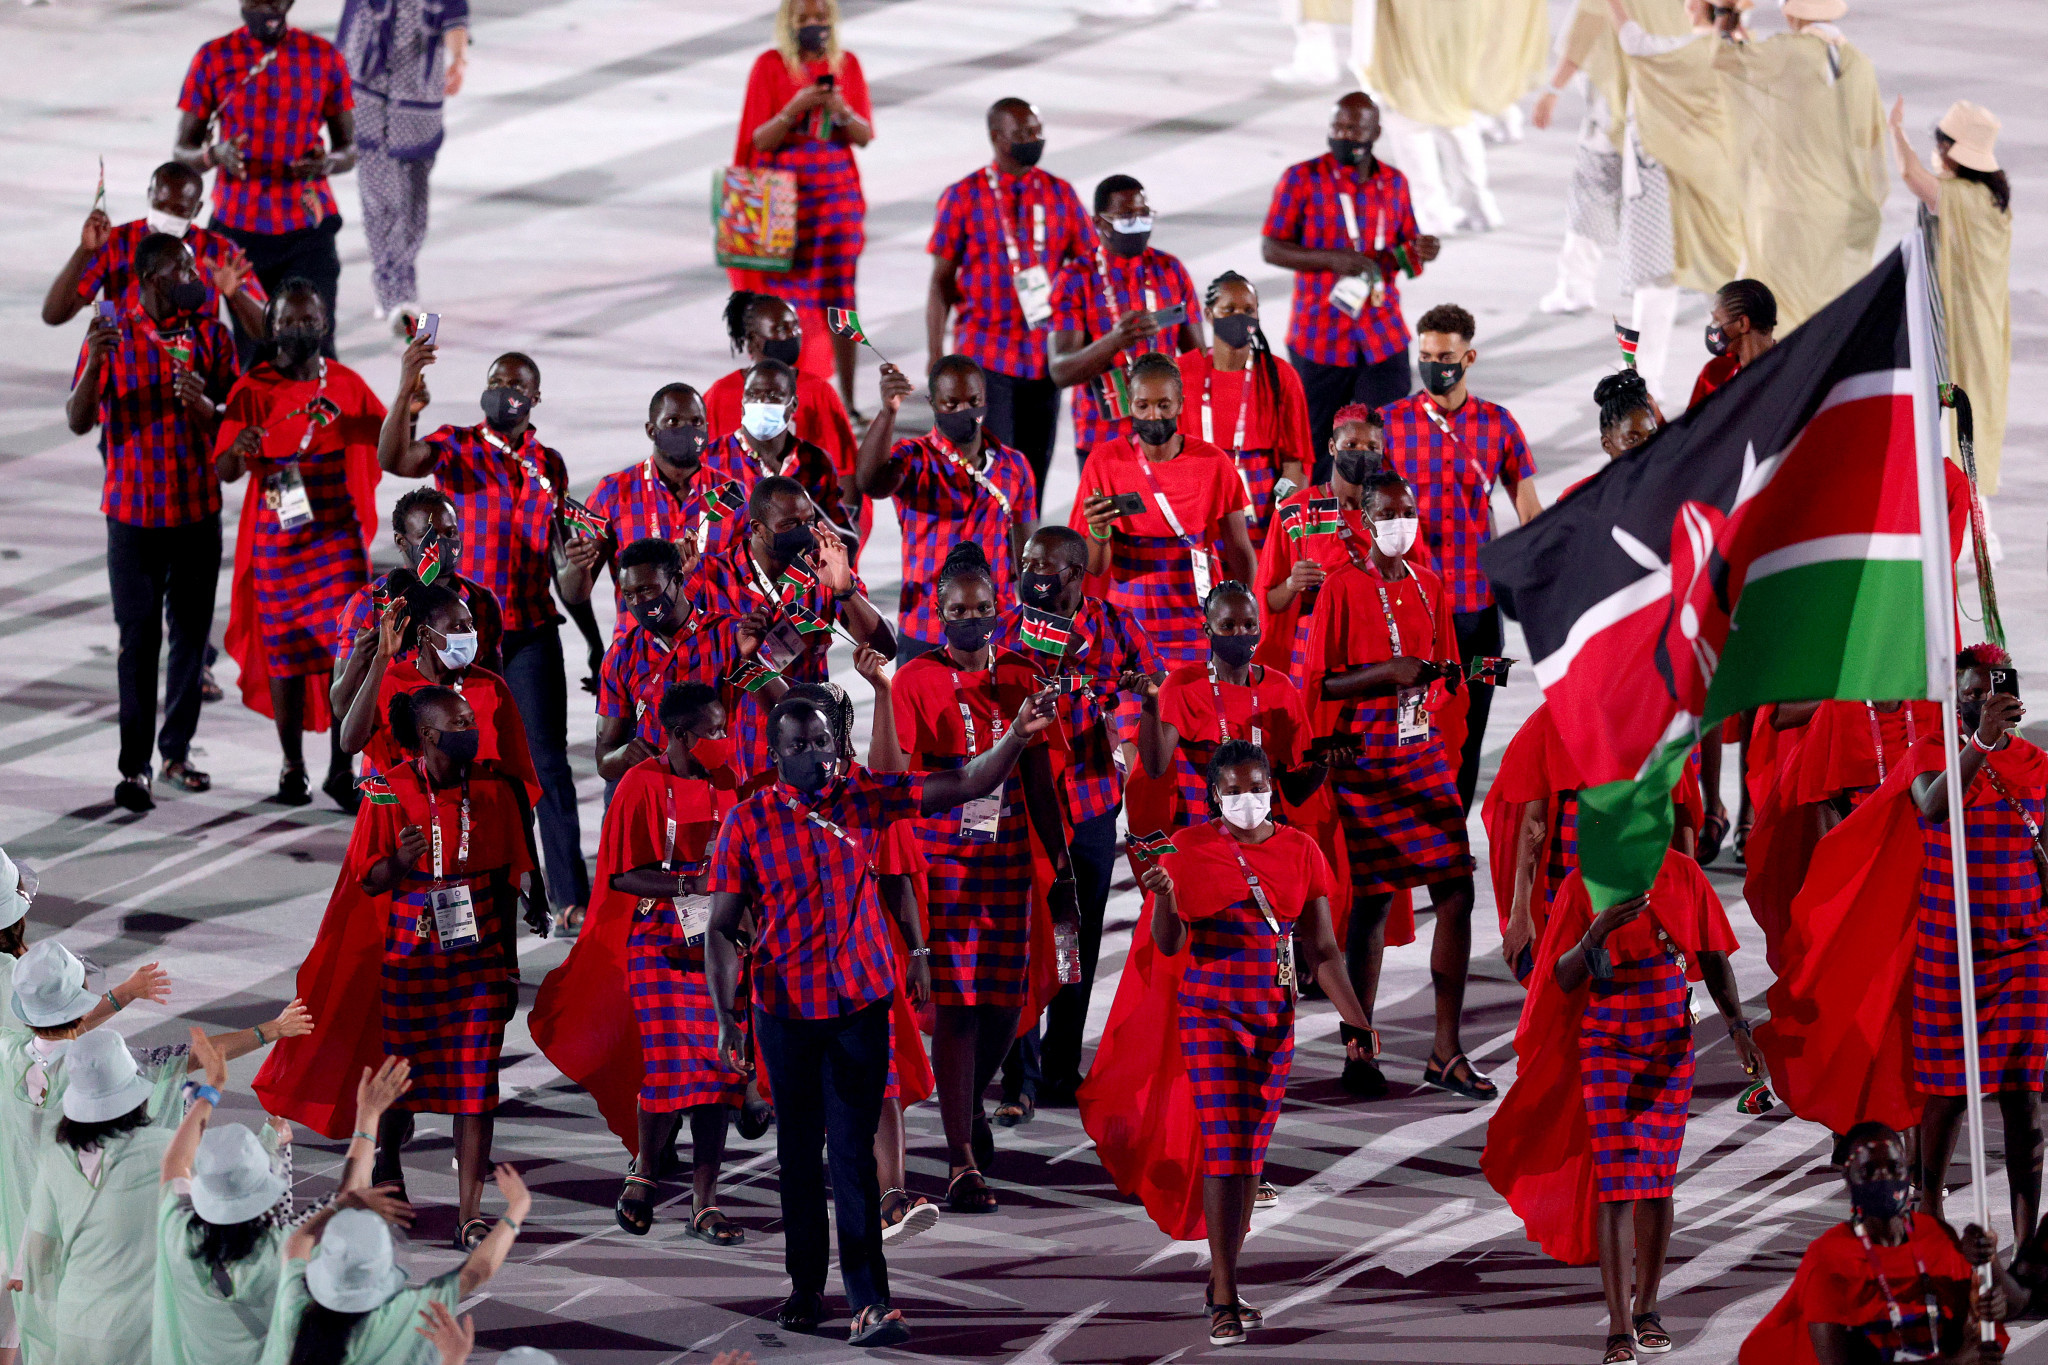 Francis Mutuku has told Kenya's athletes "the goal remains the same" after the postponement of the Accra 2023 African Games ©Getty Images